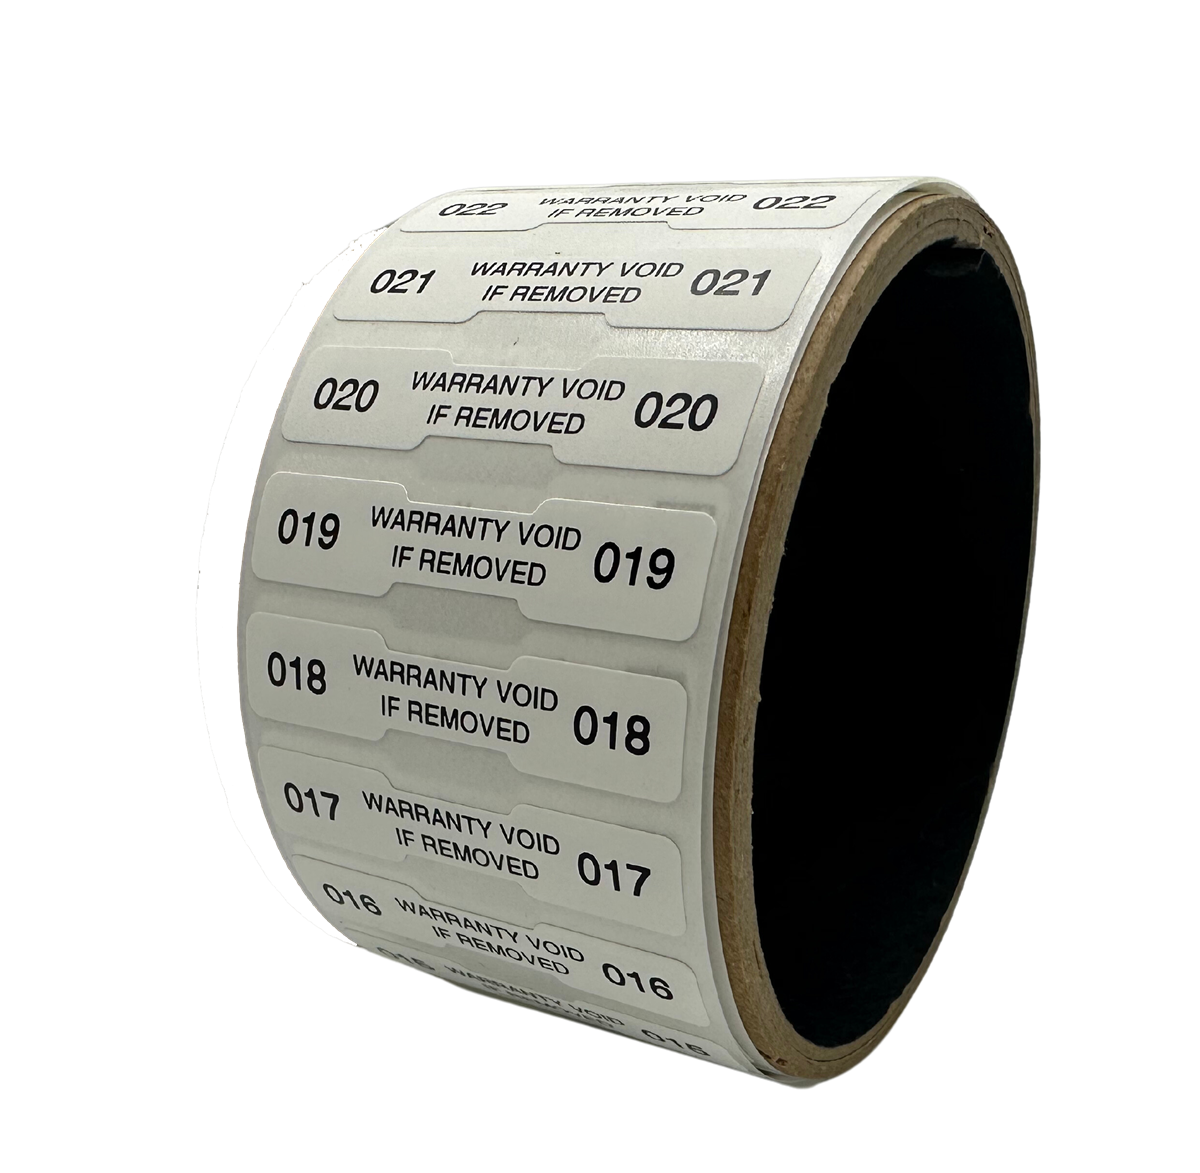 2,000 Tamper Evident White Non Residue Security Labels TamperGuard® Seal Sticker, Dogbone 1.75" x 0.375" (44mm x 9mm). Printed: Warranty Void if Removed + Serialized